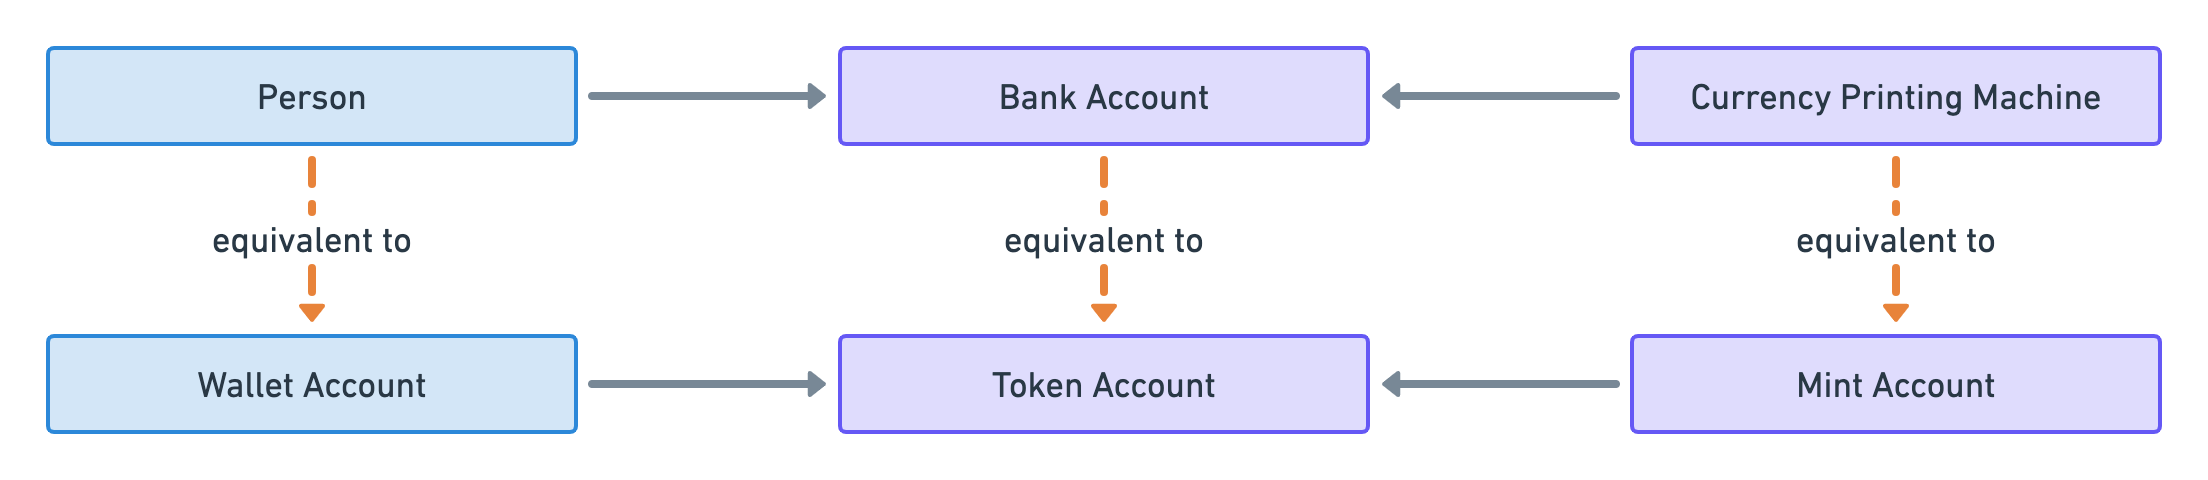 Diagram showing a “Person” linked to a “Bank Account” which is linked to a “Currency Printing Machine”. It also shows a “Wallet Account” linked to a “Token Account” which is linked to a “Mint Account”. Dashed arrows labelled “equivalent to” pointing from person to wallet account; from bank account to token account and from “Currency Printing Machine” to mint account highlight the analogy.